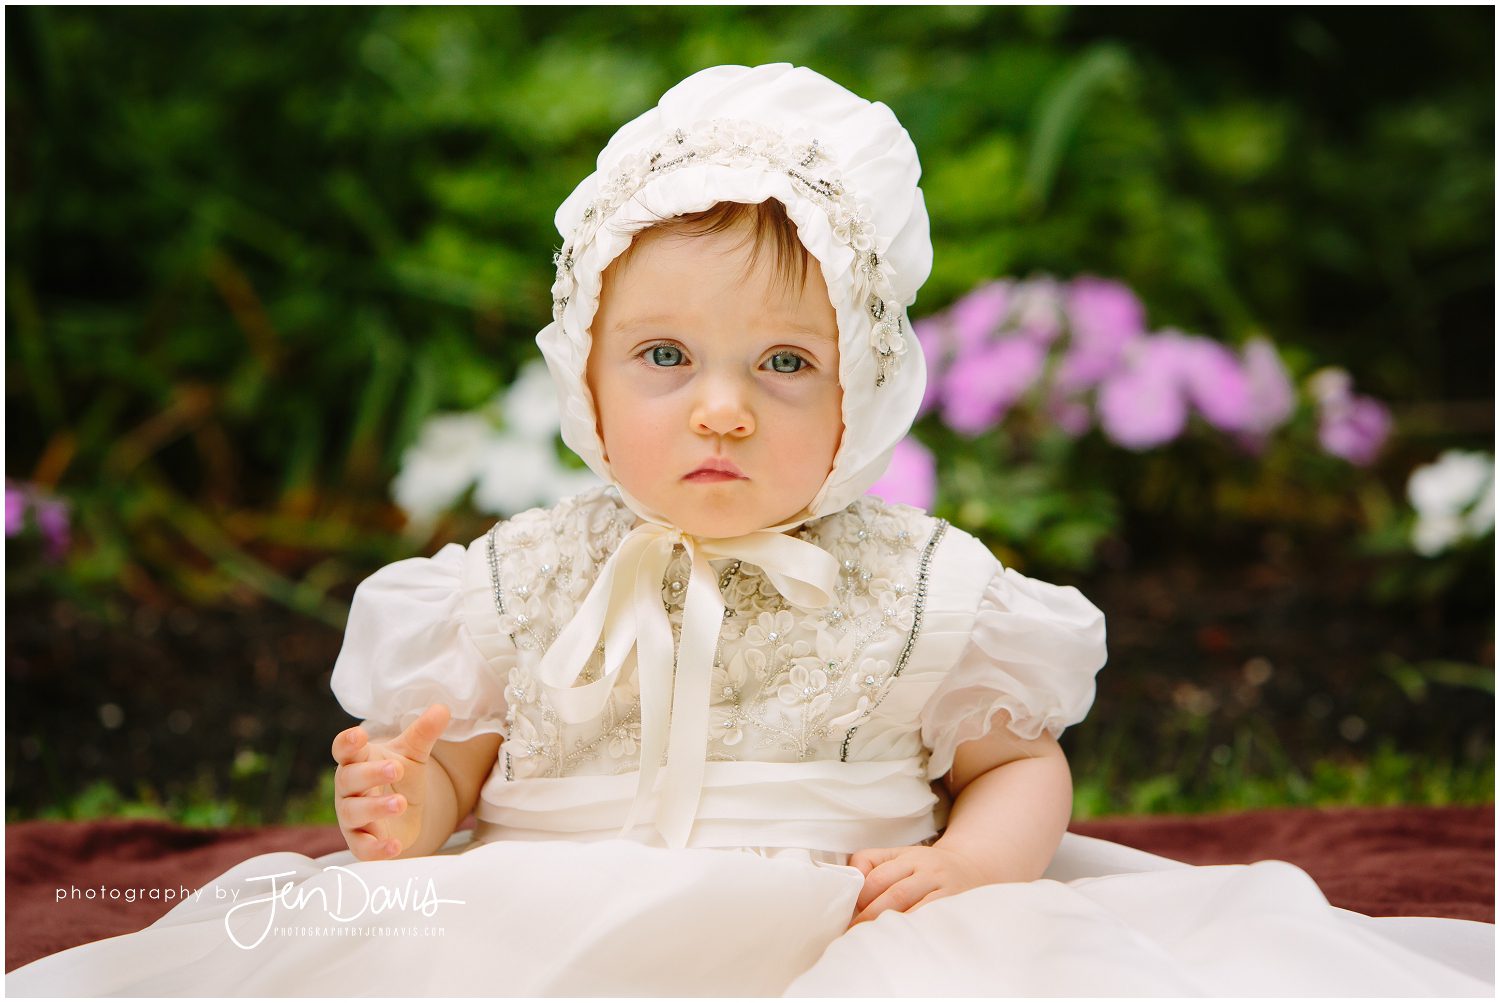 1 year old girl baptism bonnet and gown